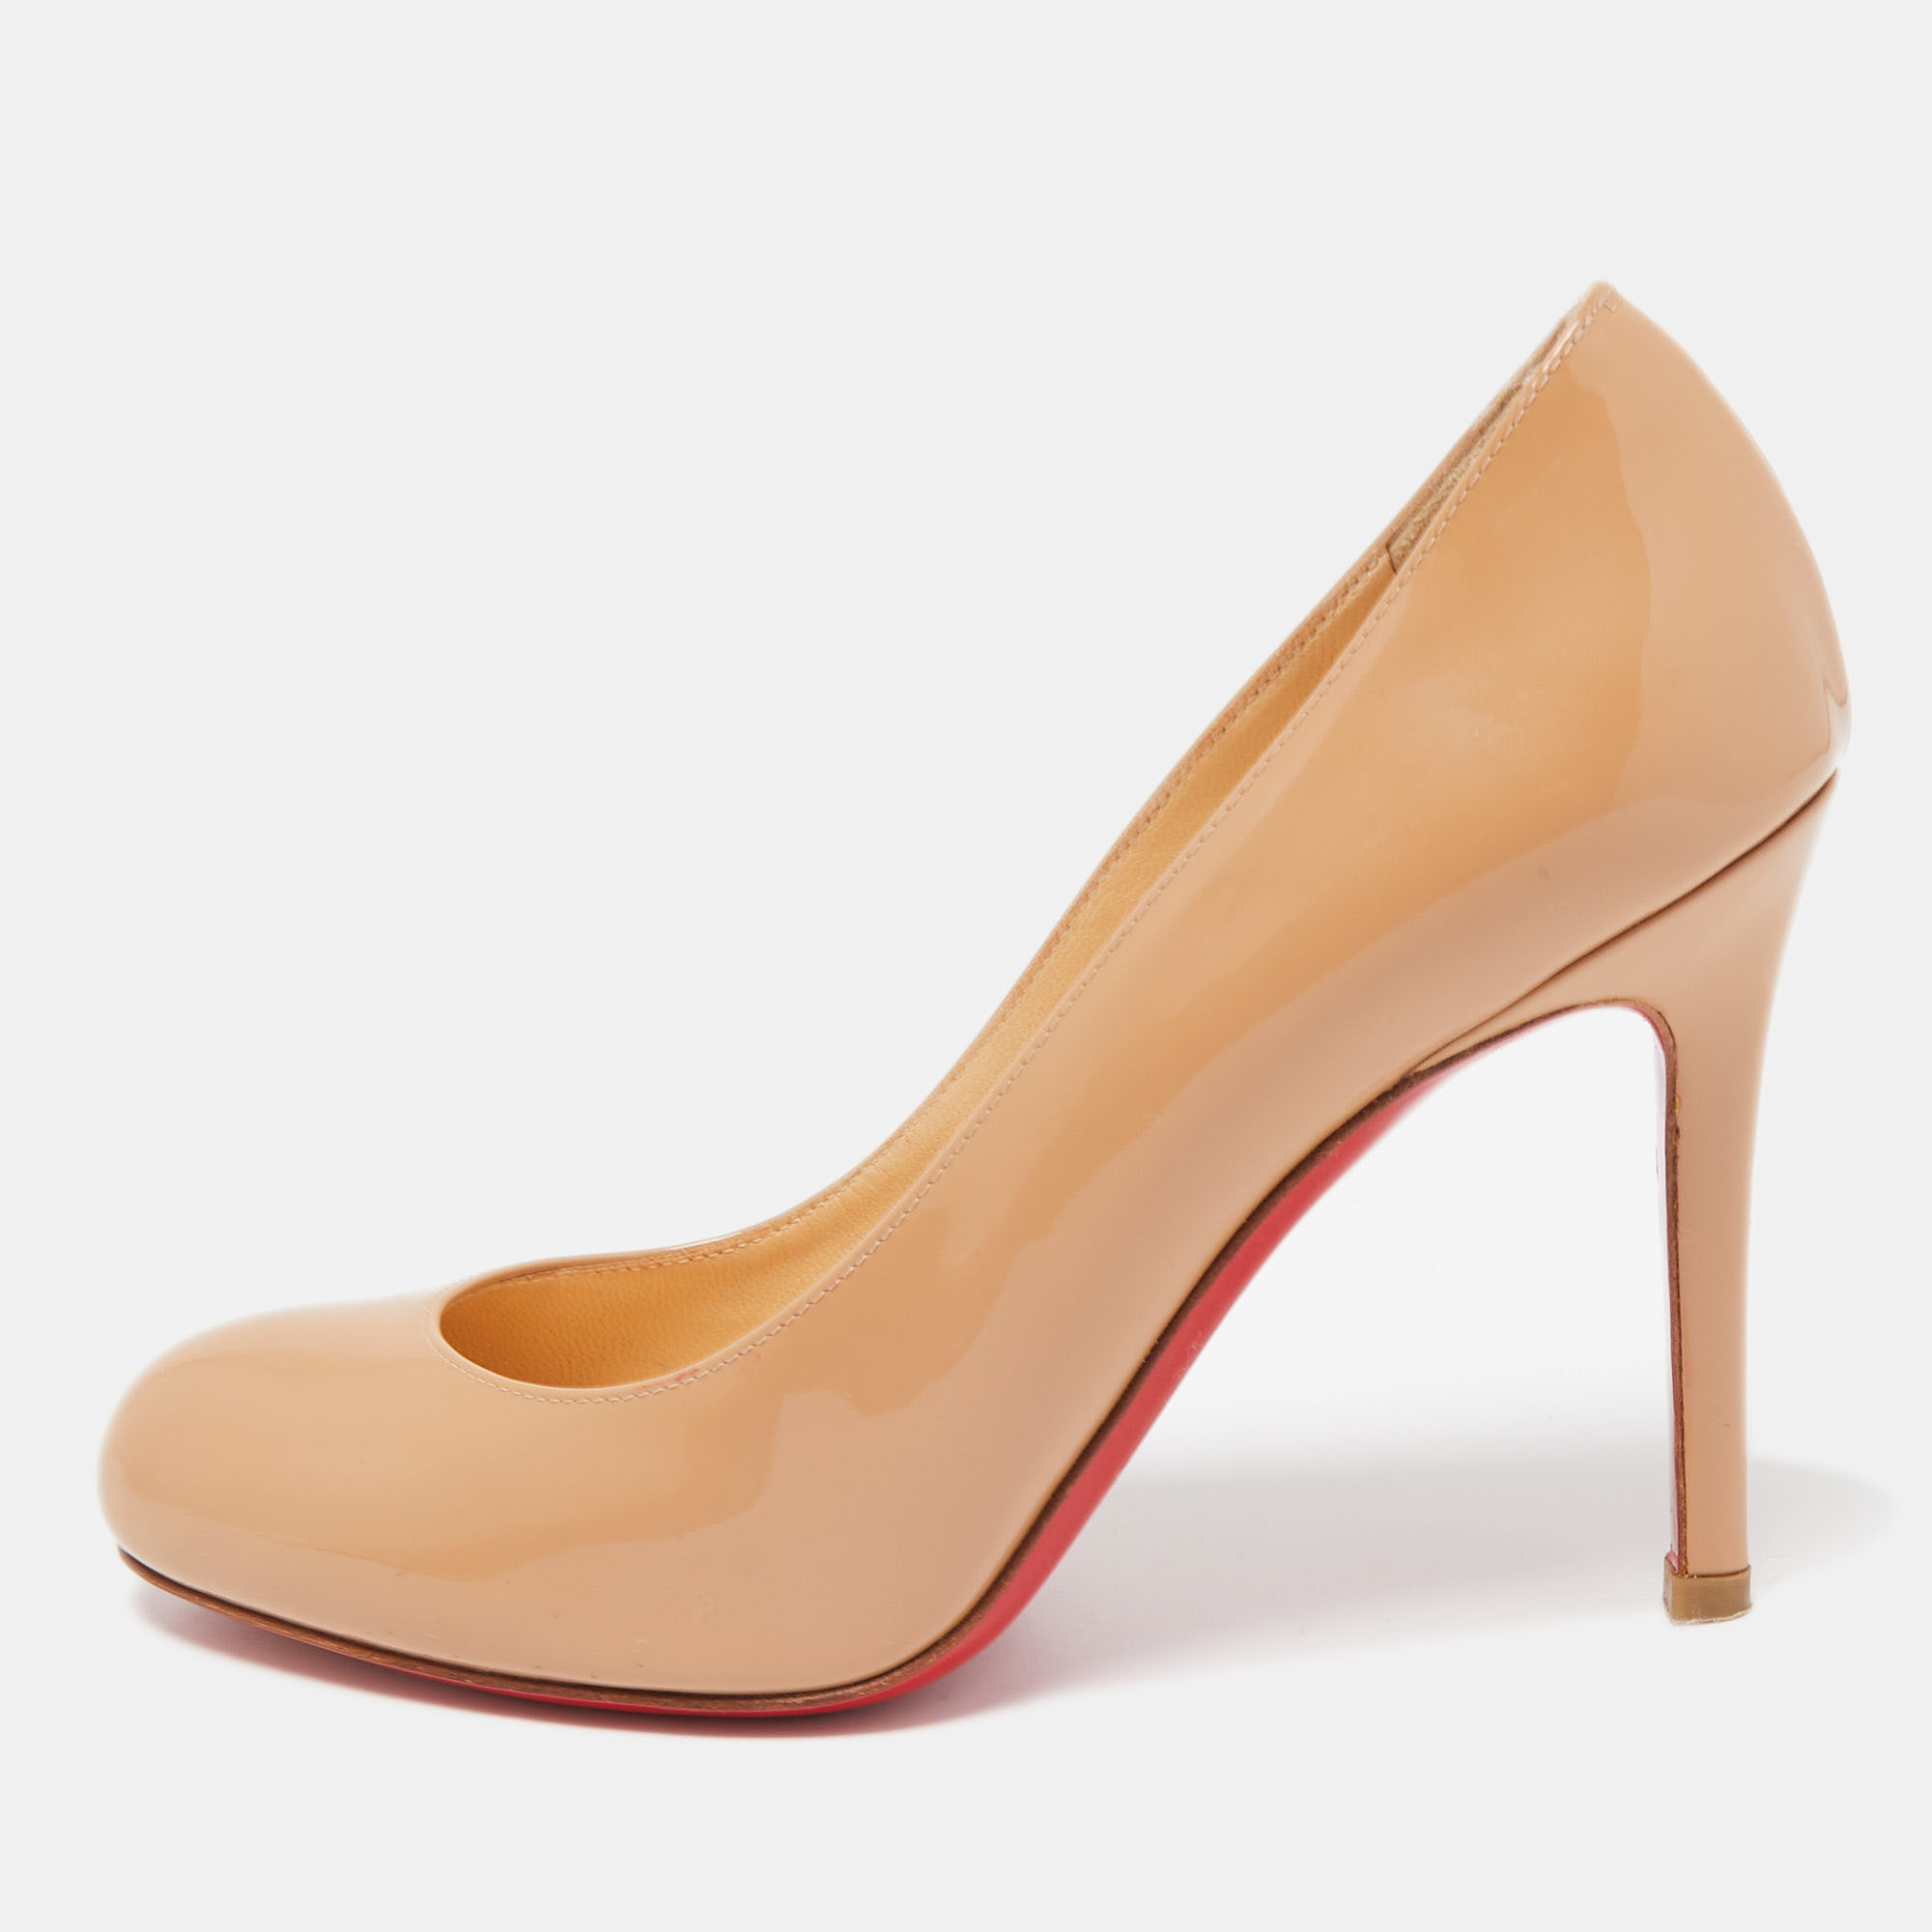 These timeless Christian Louboutin beige shoes are meant to last you season after season. They have a comfortable fit and high quality finish.